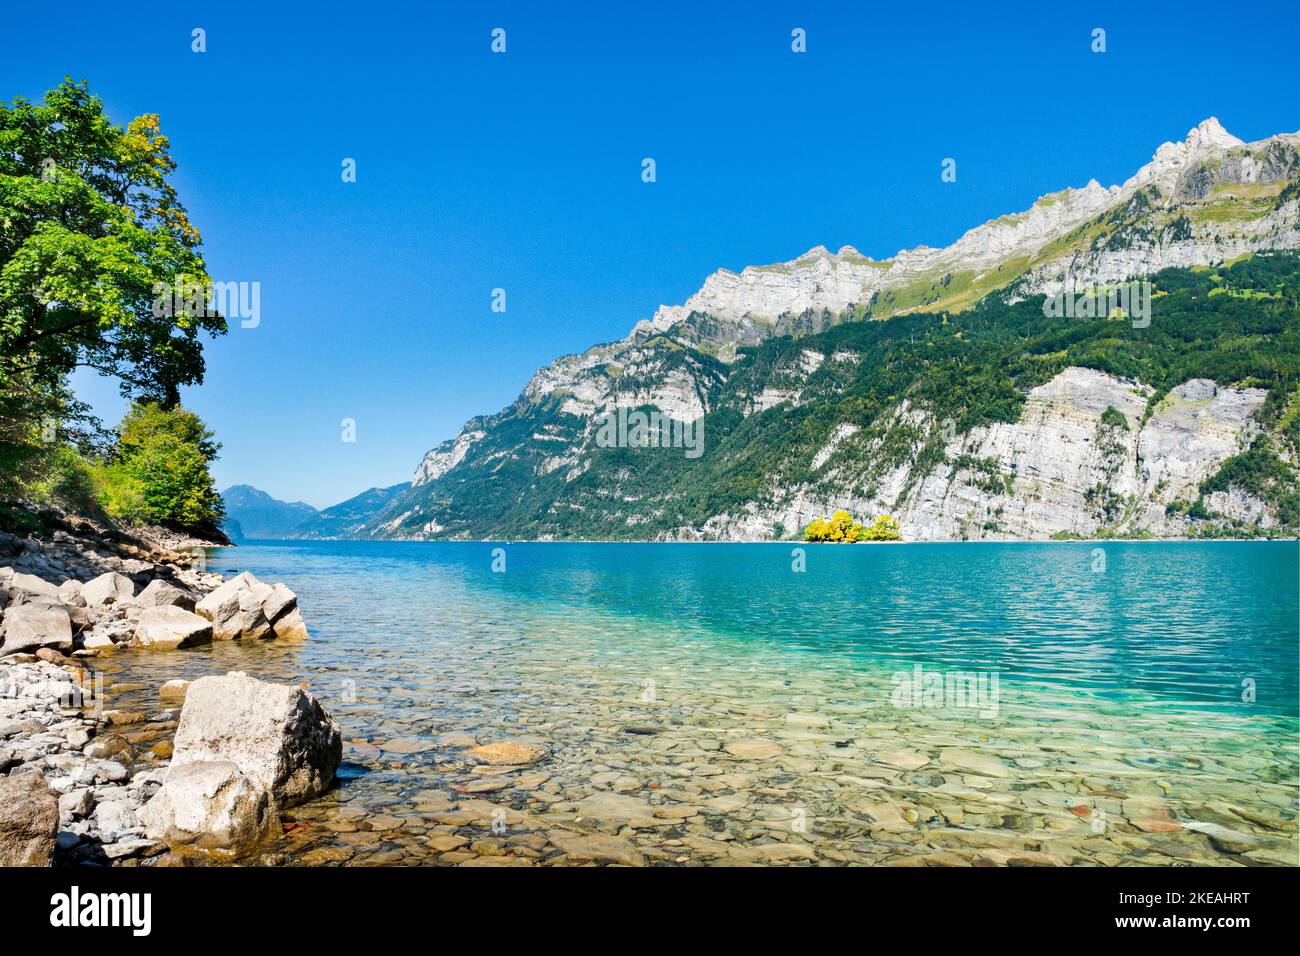 Lake Walen with small island at the foot of the Churfirsten and massifs Schaeren and Leistchamm in the background, Switzerland, St. Gallen Stock Photo